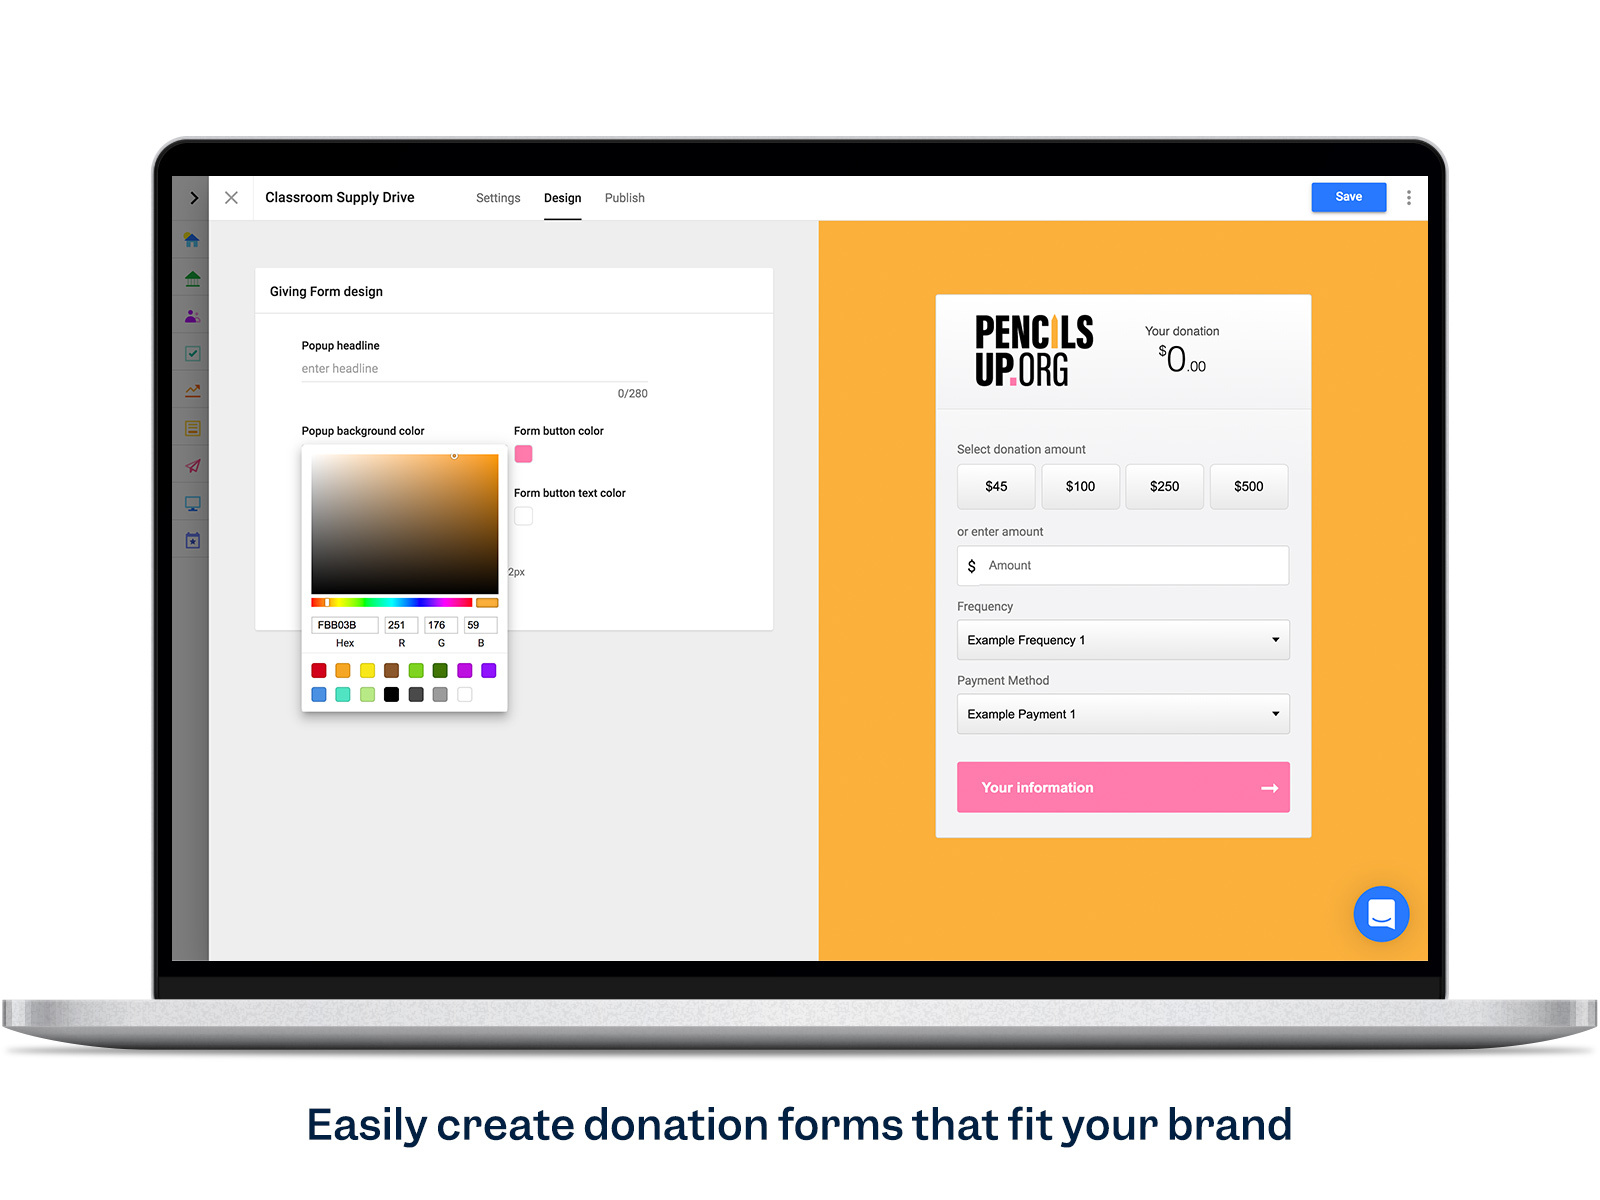 Easily customizable donation forms